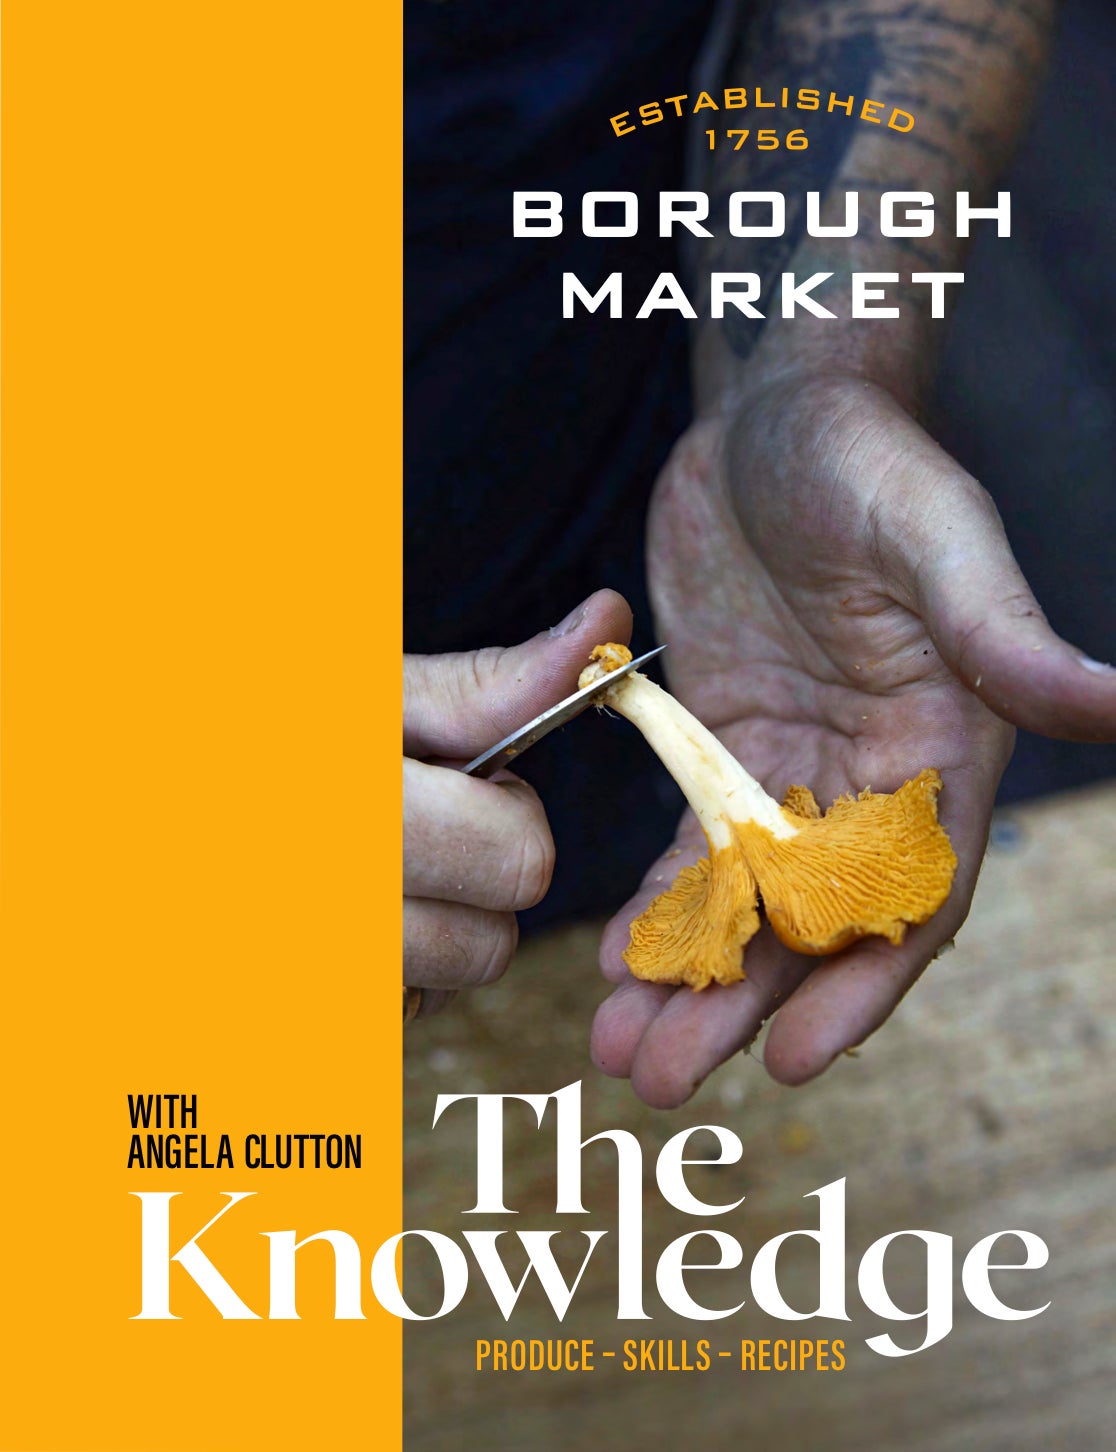 ‘The Knowledge’ is a step-by-step guide to using the produce from the market